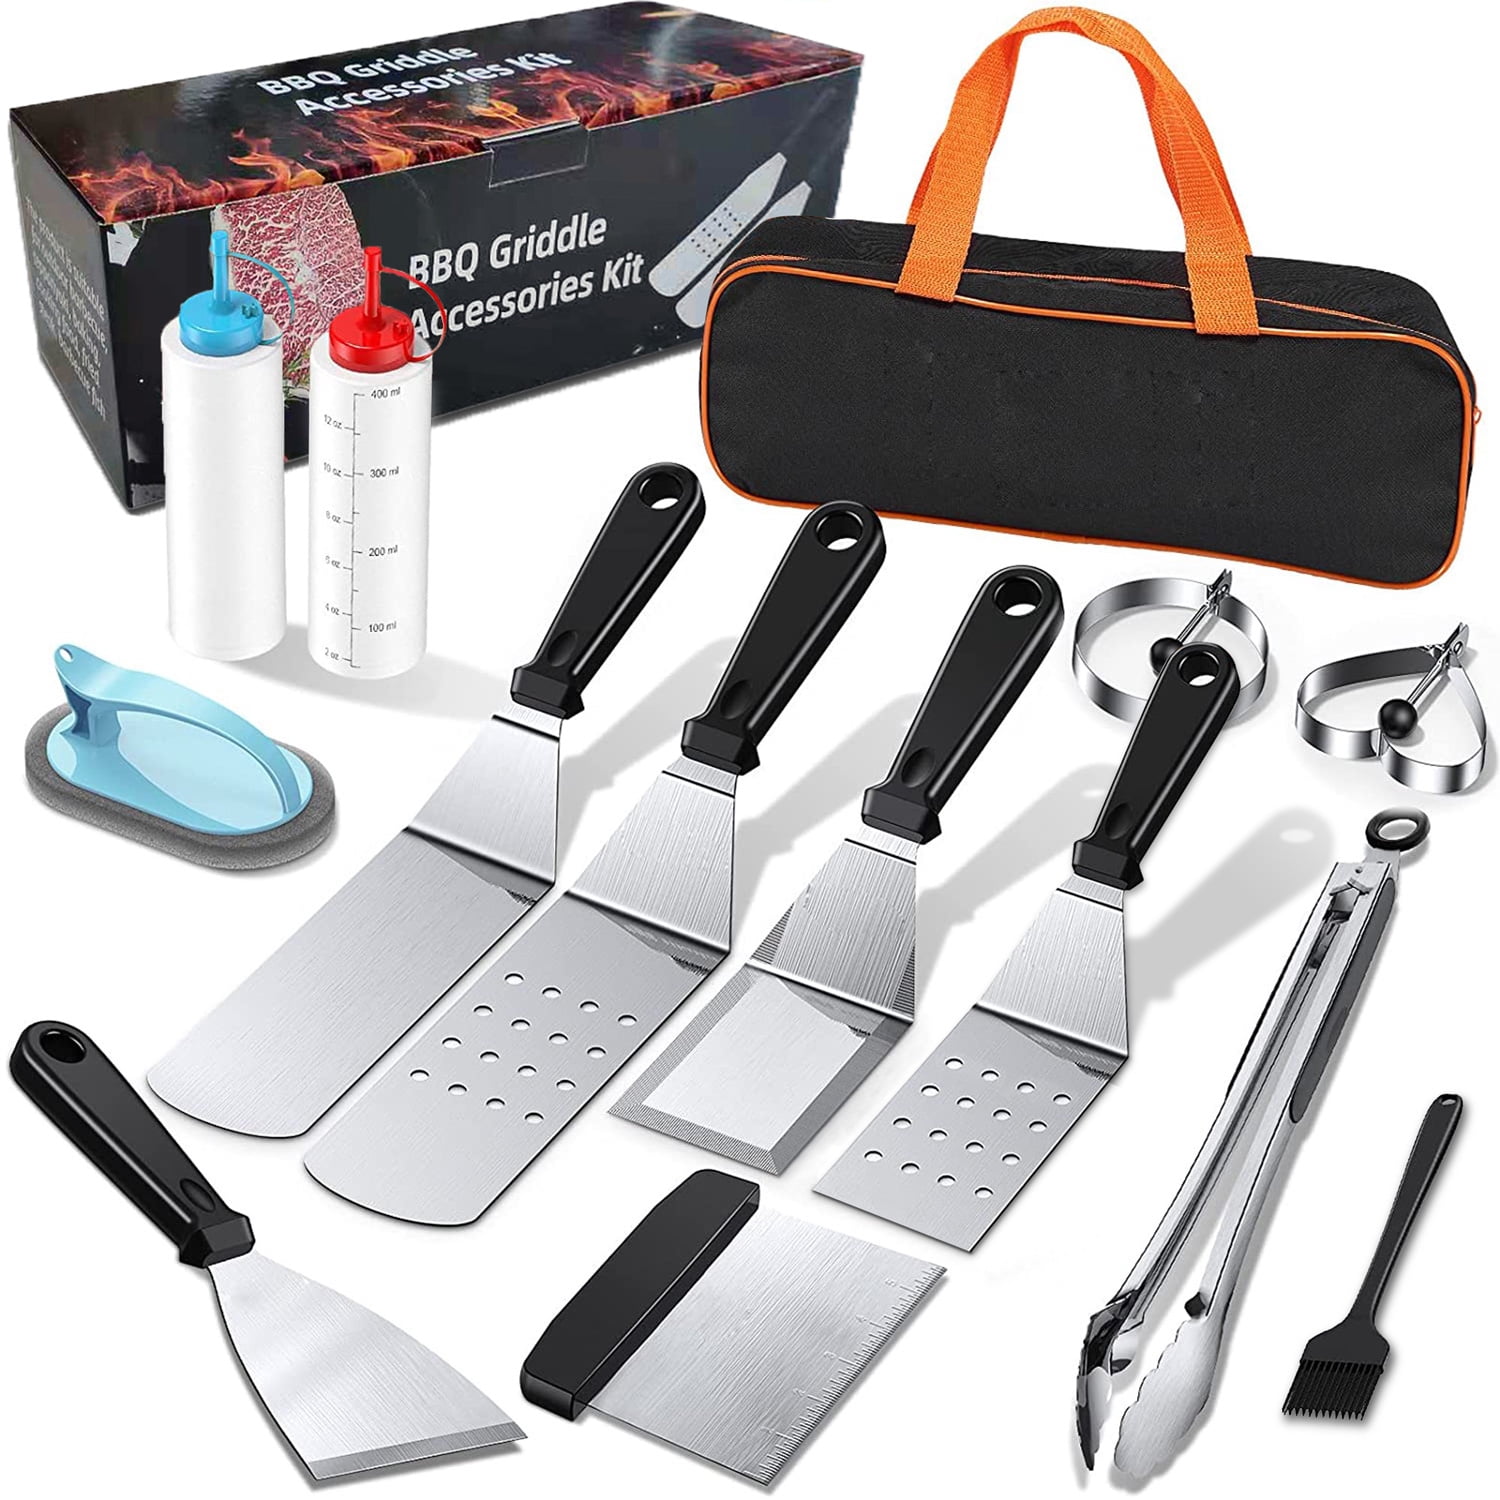 Details about   Griddle Accessories with Cleaning Kit for Blackstone Flat Top Grill 30 Piece 